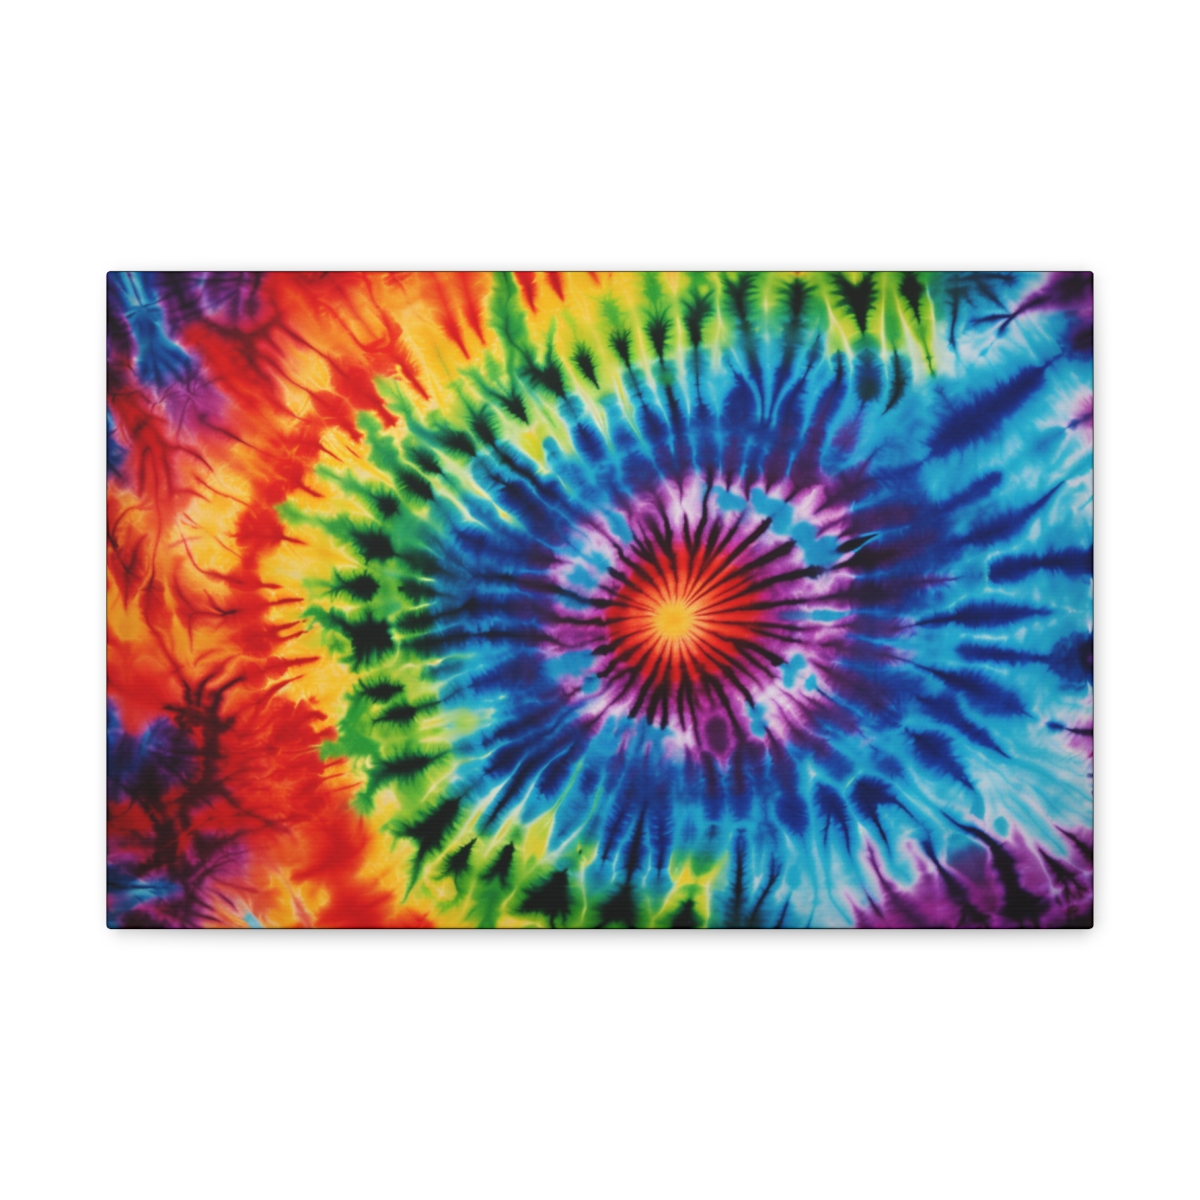 Hippie Trippy Abstract Art Canvas Print: Flow Of Love